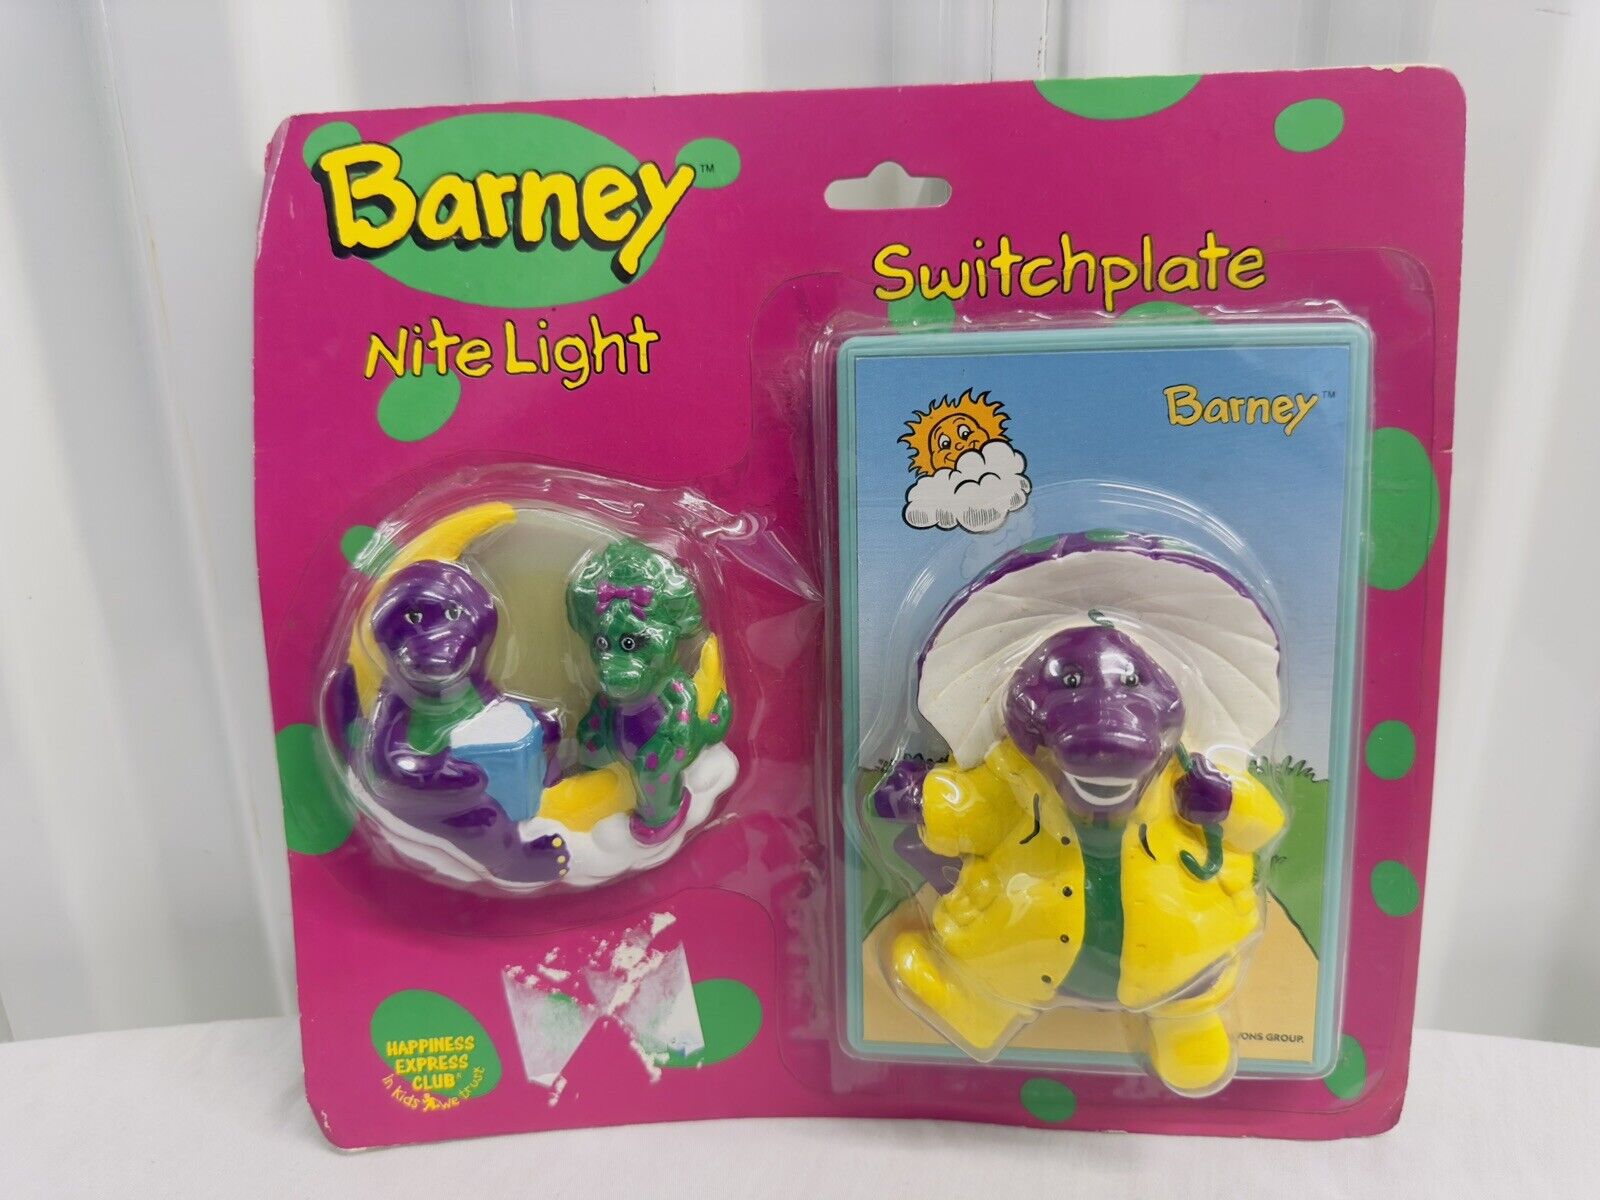 Vintage Barney Nite Light And Switchplate 1992 By Happiness Express INC.